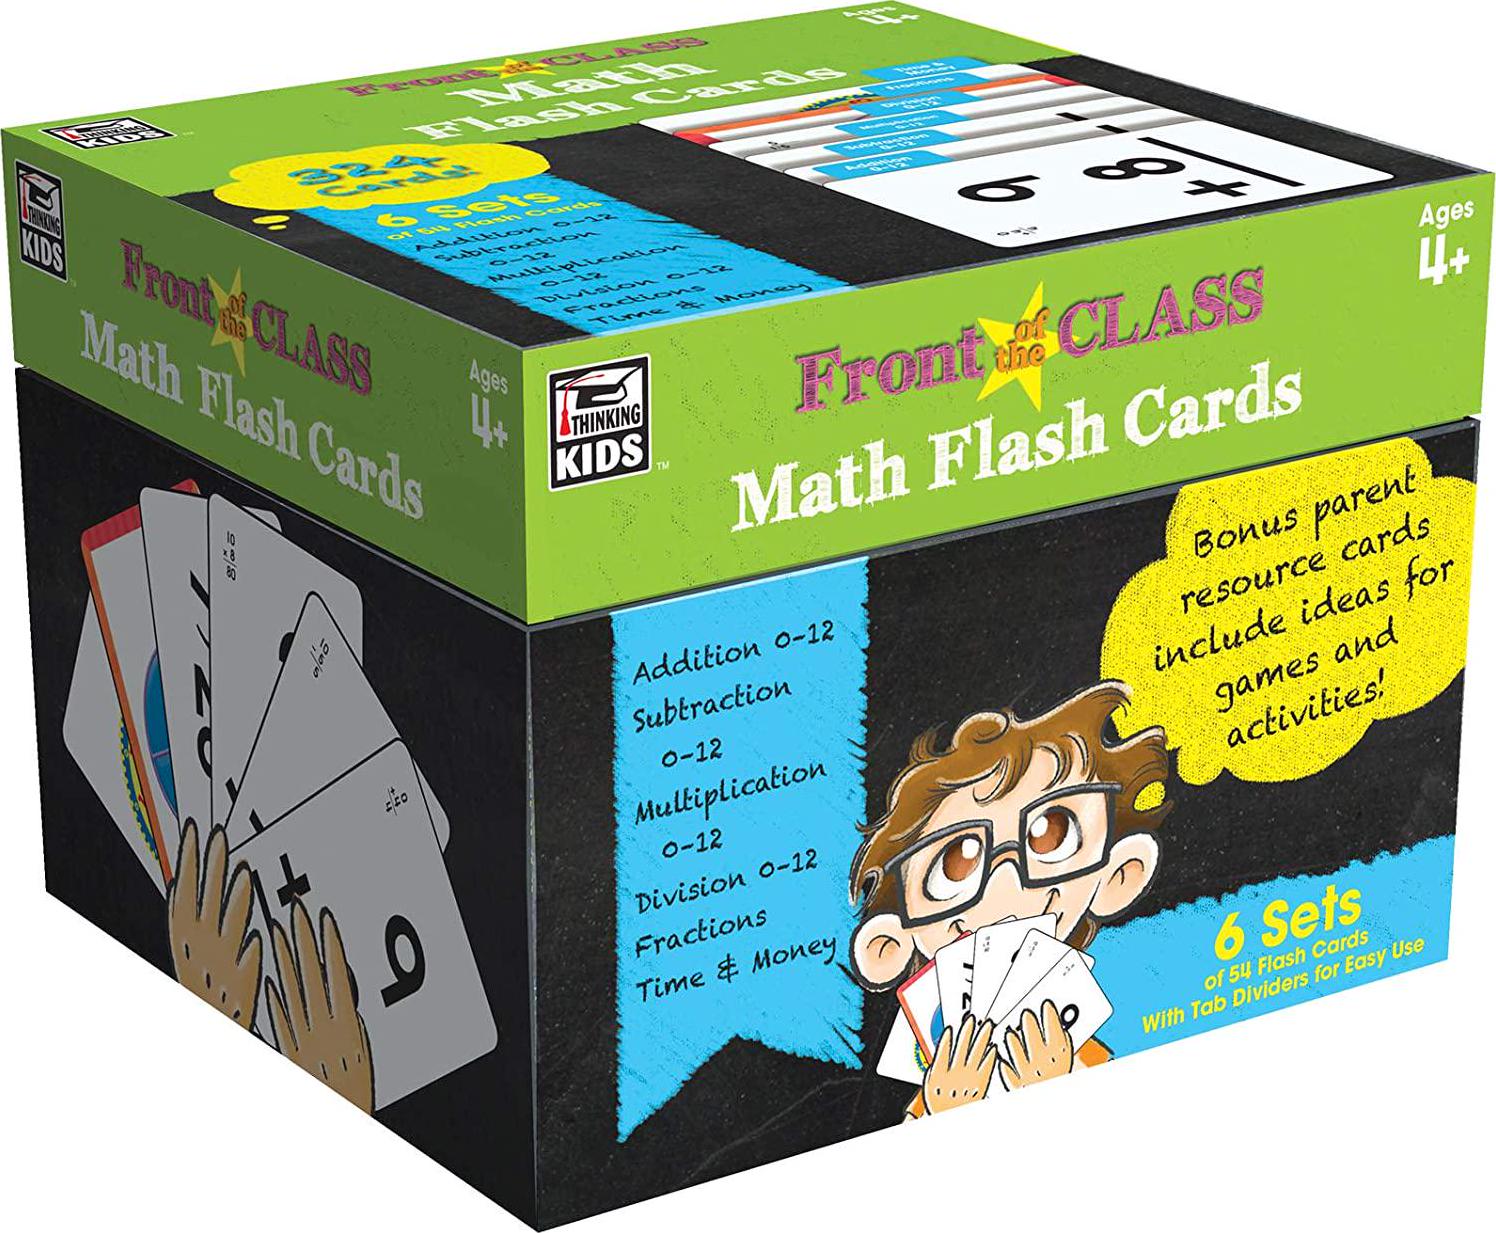 Thinking Kids, Math Flash Cards Ages 4+